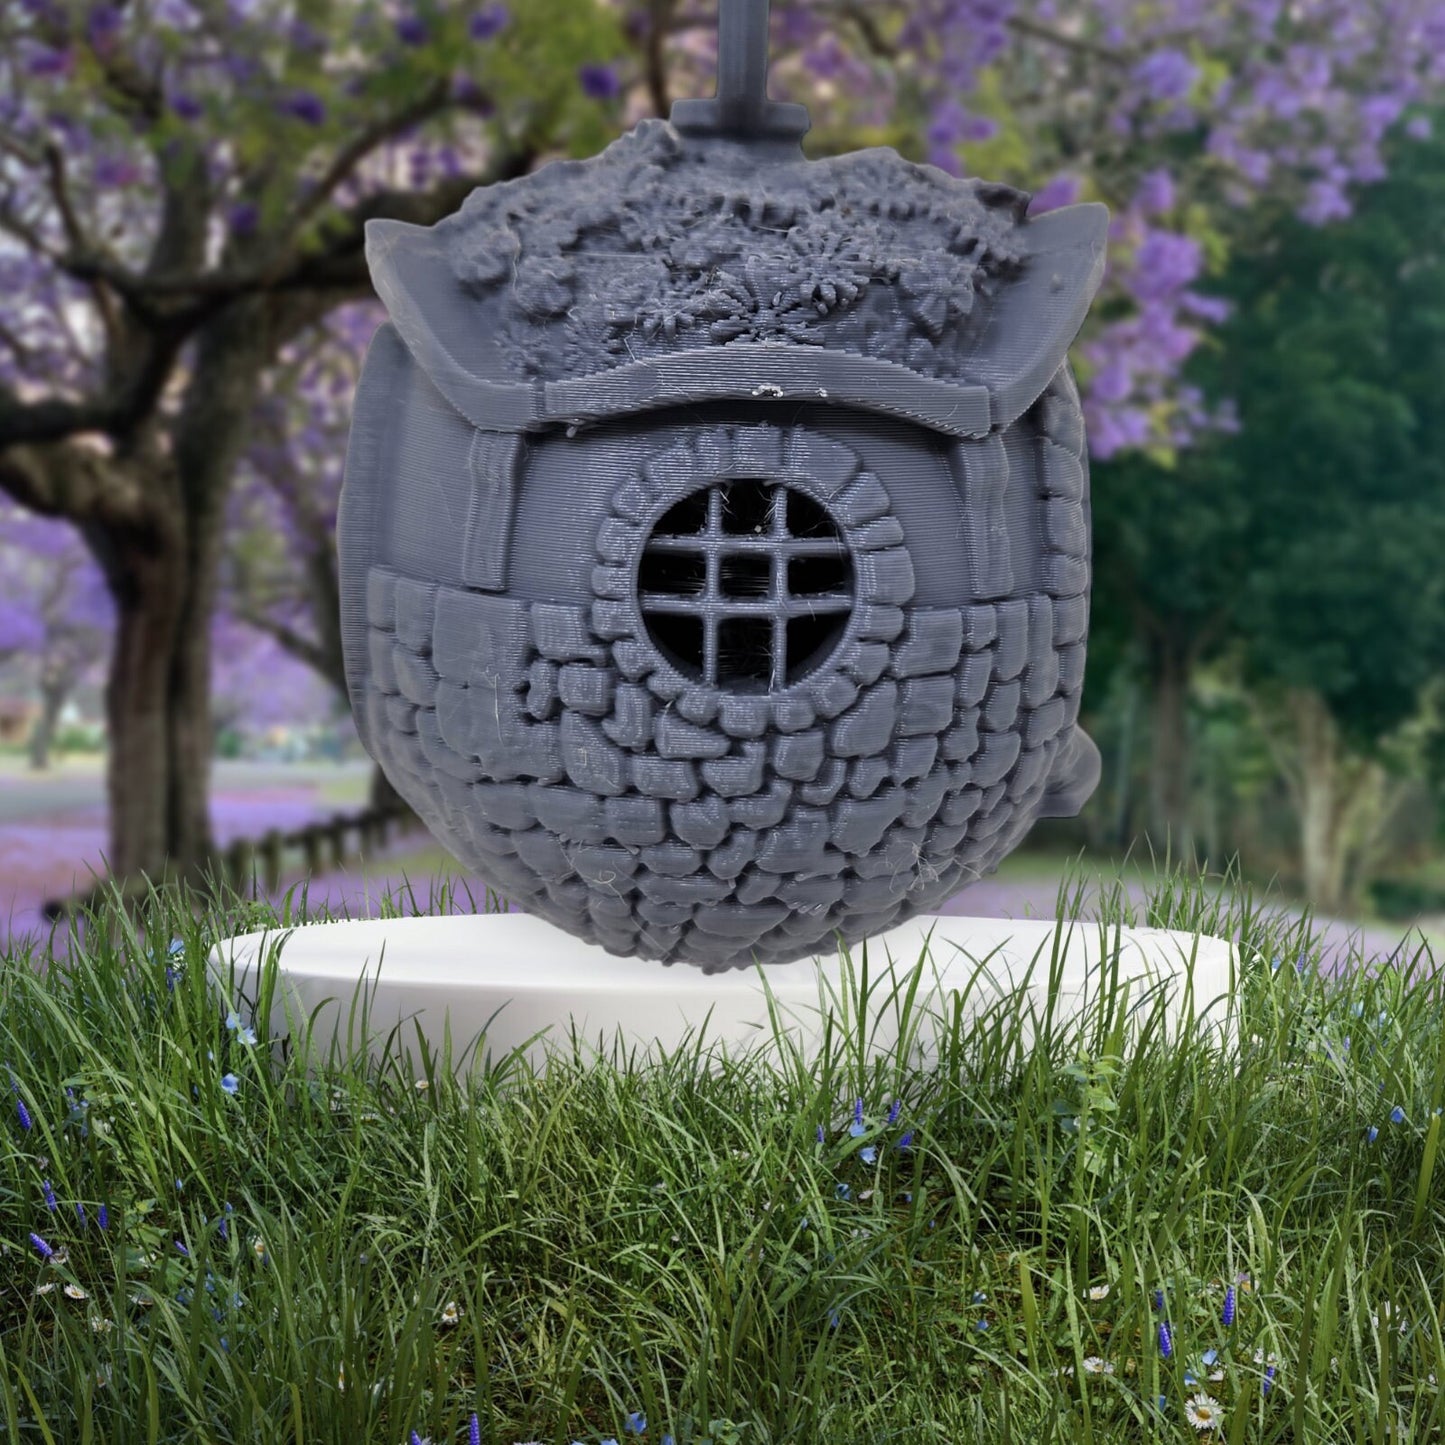 3D Printed Shire Hobbit Hole Christmas Ornament - Whimsical Holiday Decor